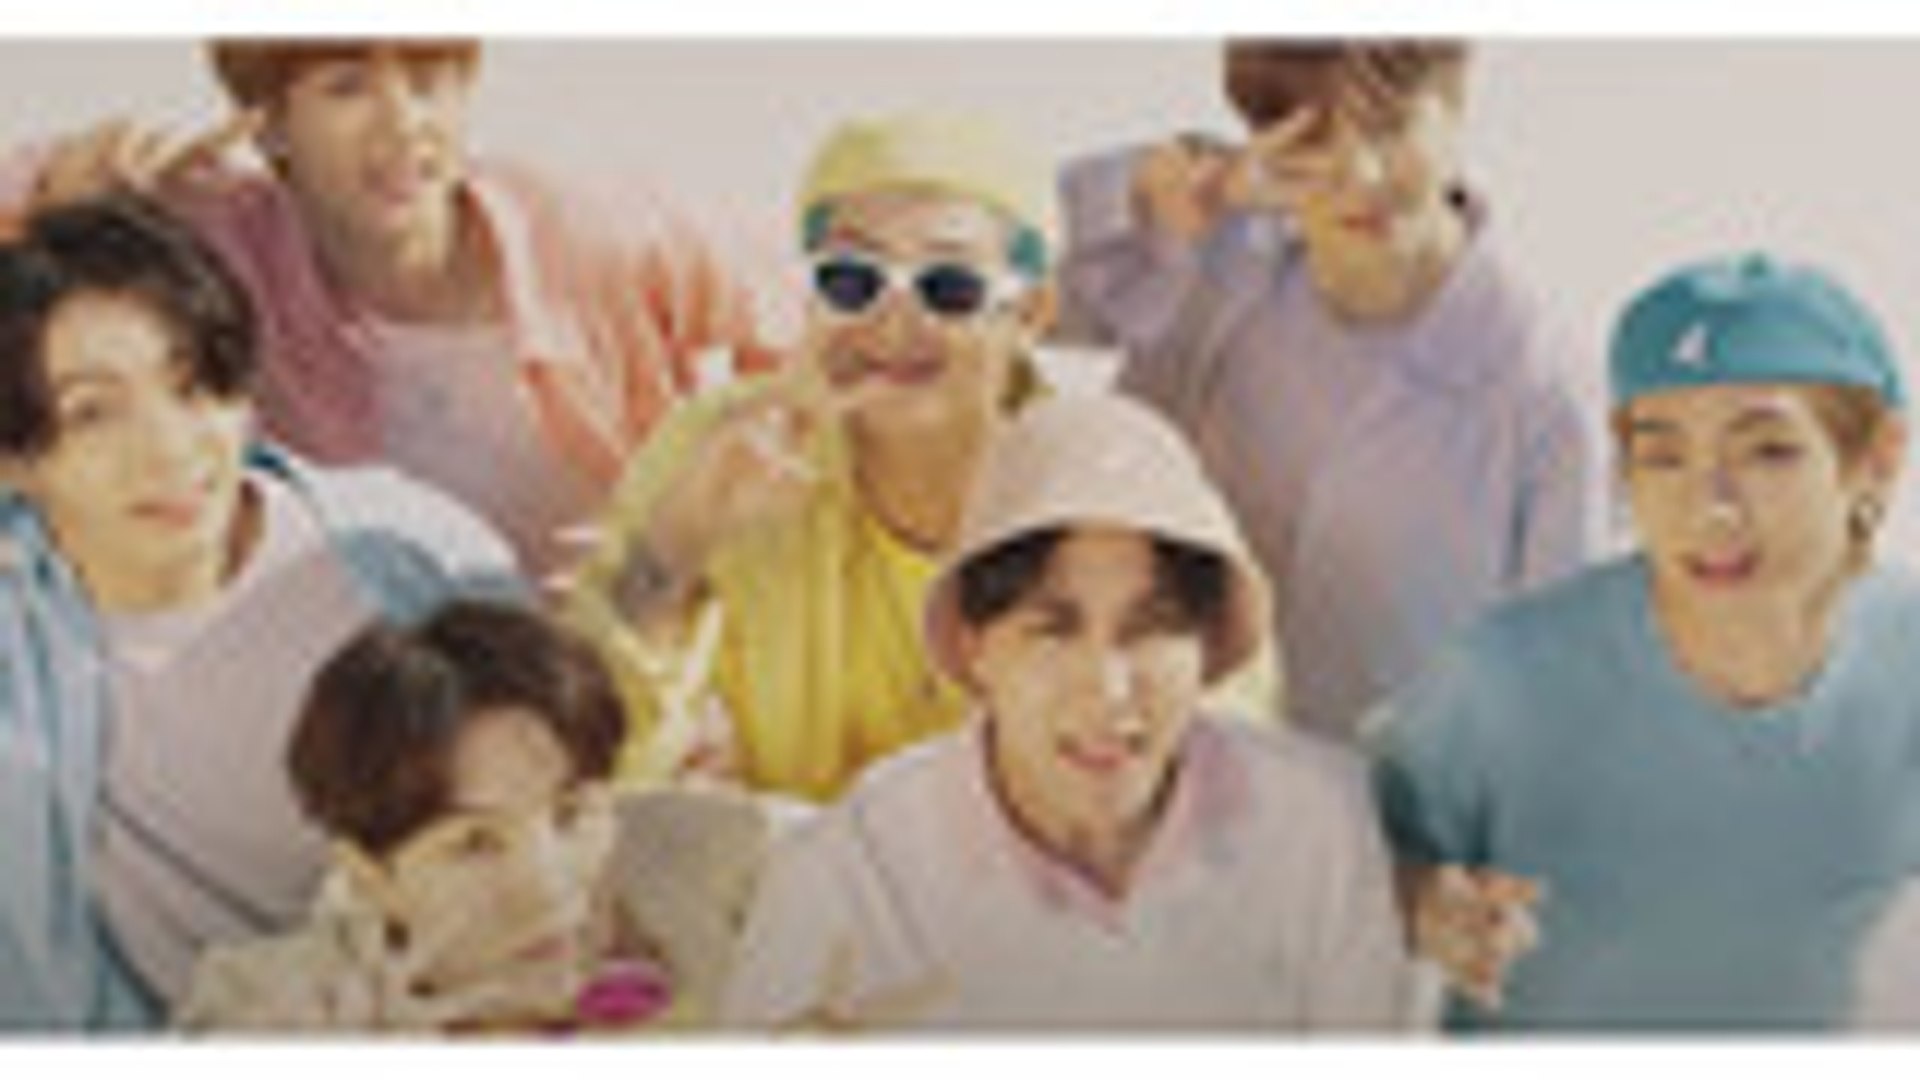 BTS Scores First No. 1 on Hot 100 With 'Dynamite' | Billboard News